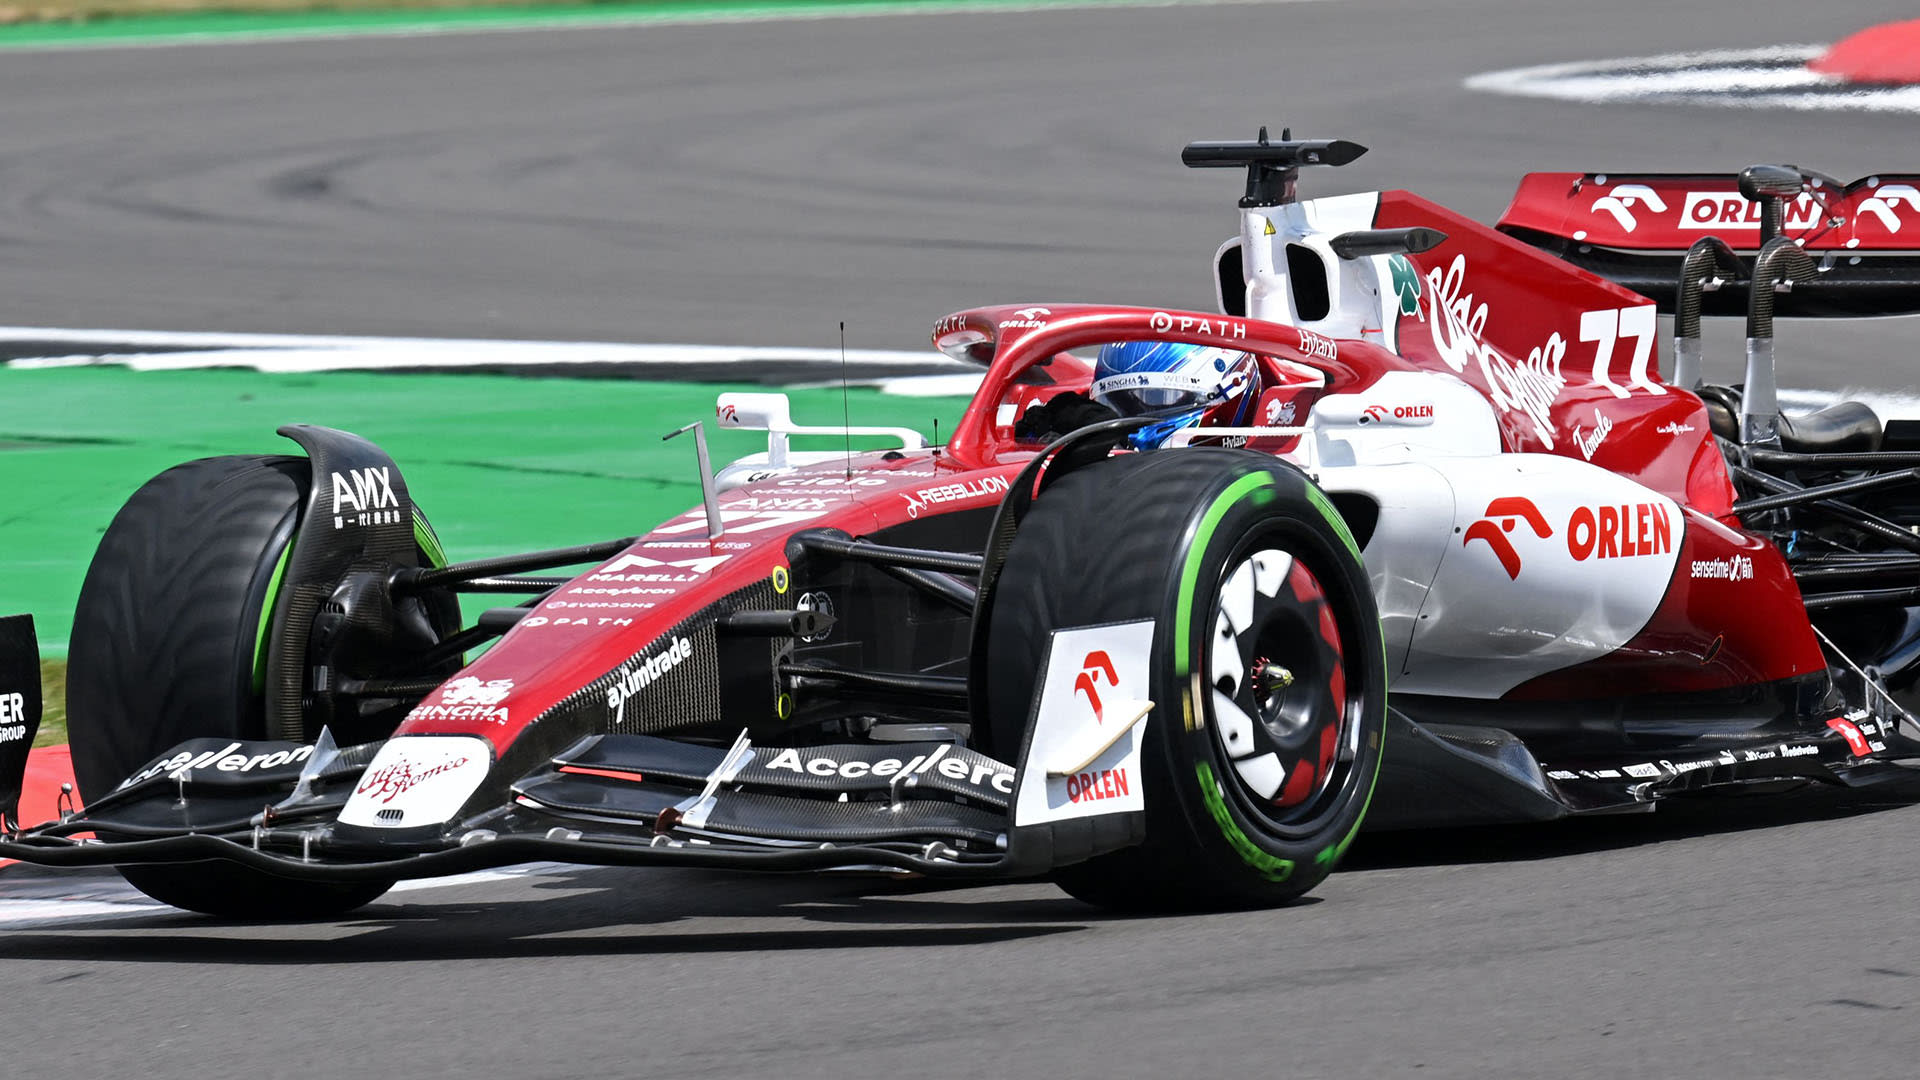 FP1 report and highlights from the 2022 British Grand Prix Alfa Romeos Bottas leads Hamilton in rain-affected first practice at Silverstone Formula 1®